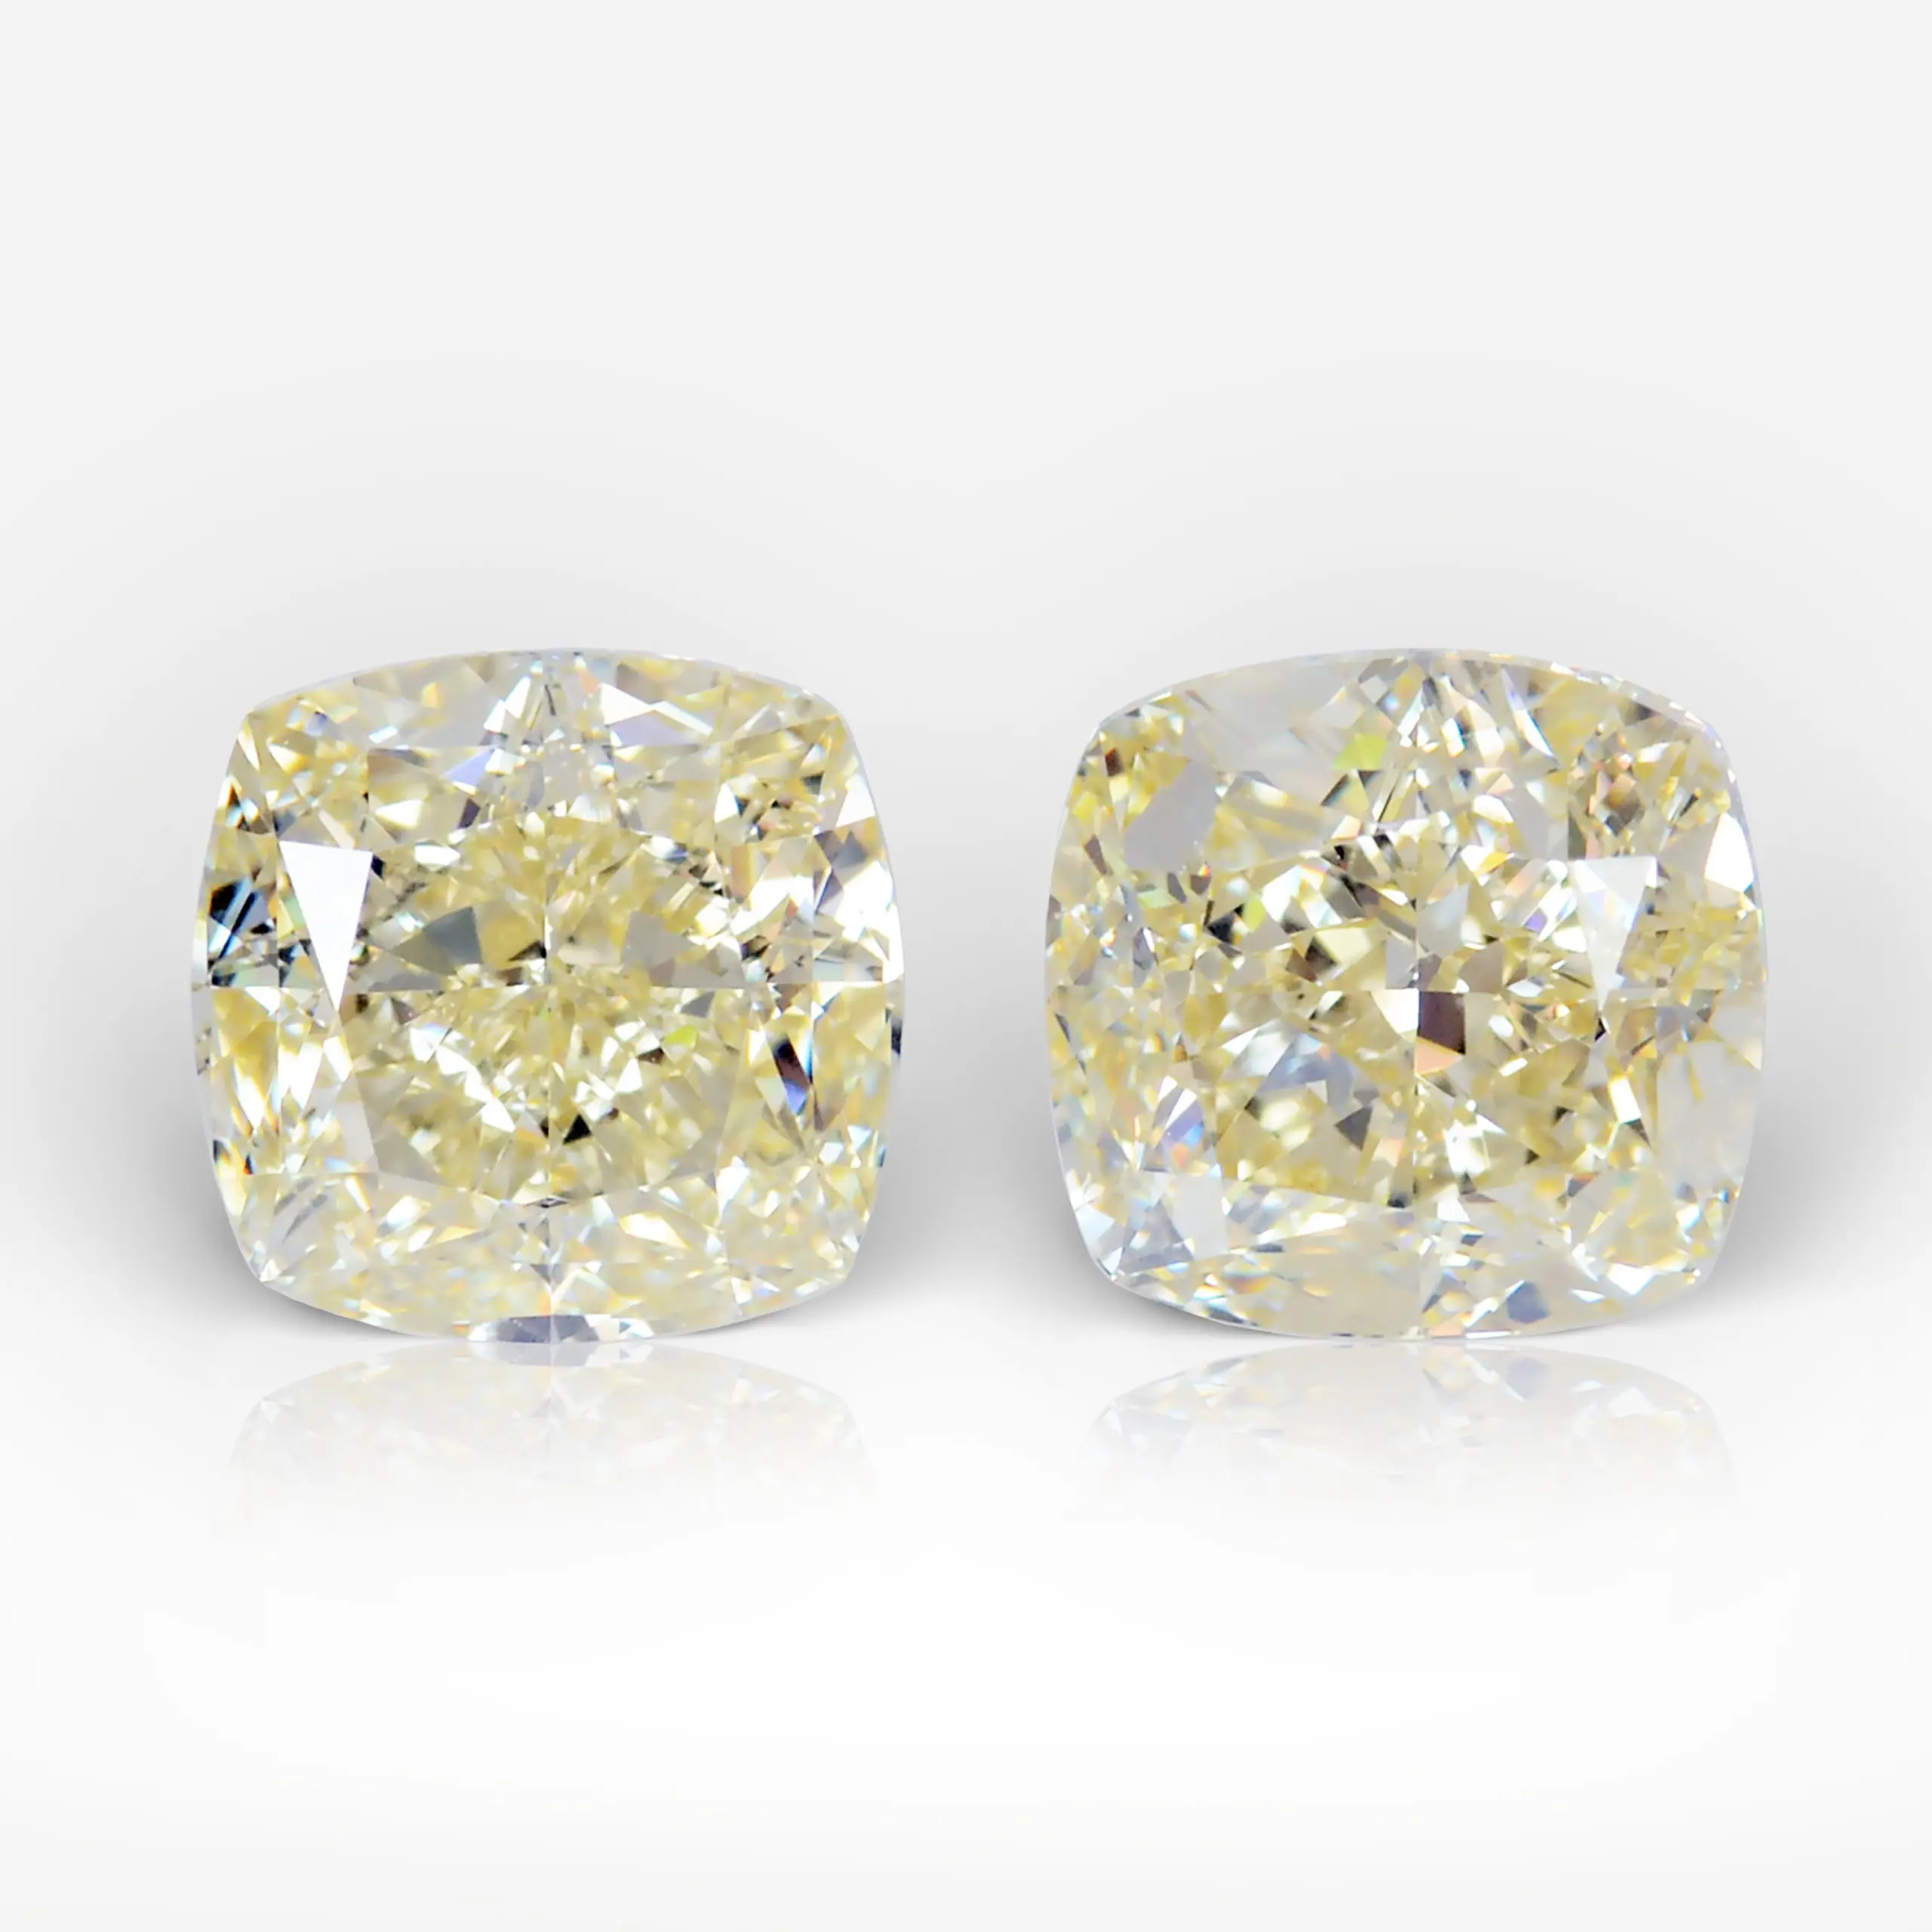 2.03 and 2.01 carat Pair of Yellow (W-X) VS1/VVS2 Cushion Shape Diamonds GIA - picture 1